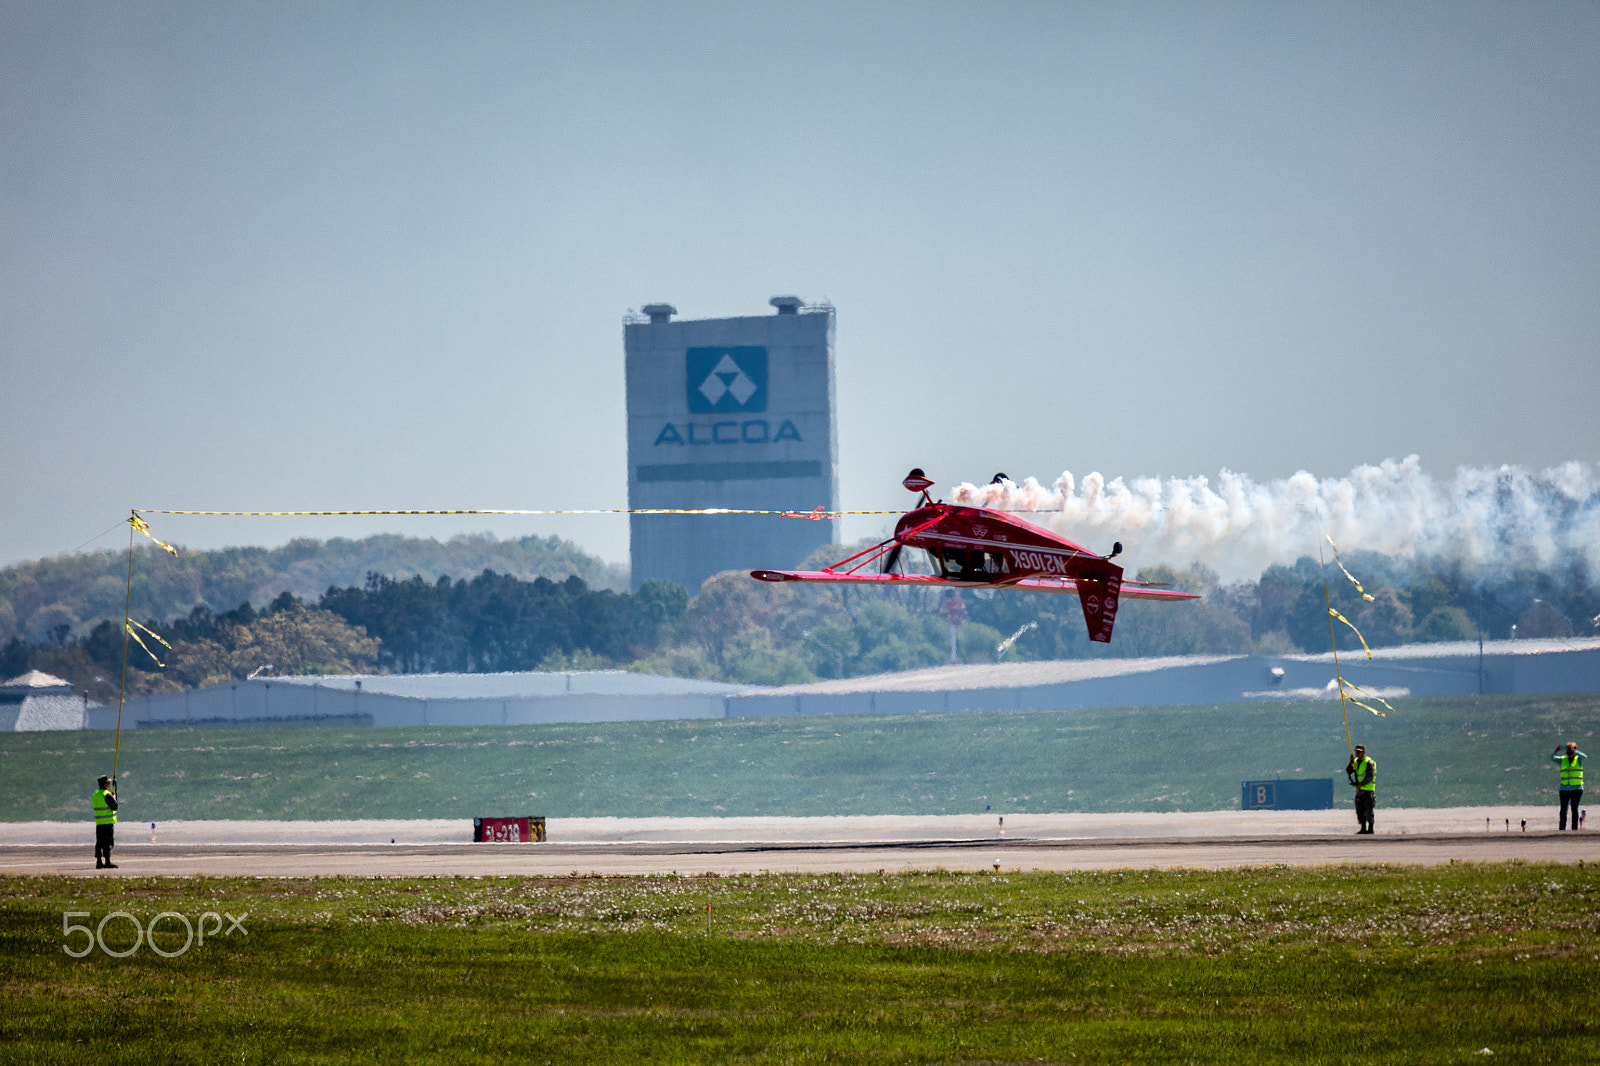 Canon EOS 5DS + Sigma 150-600mm F5-6.3 DG OS HSM | C sample photo. Greg koontz cutting ribbon while flying inverted photography